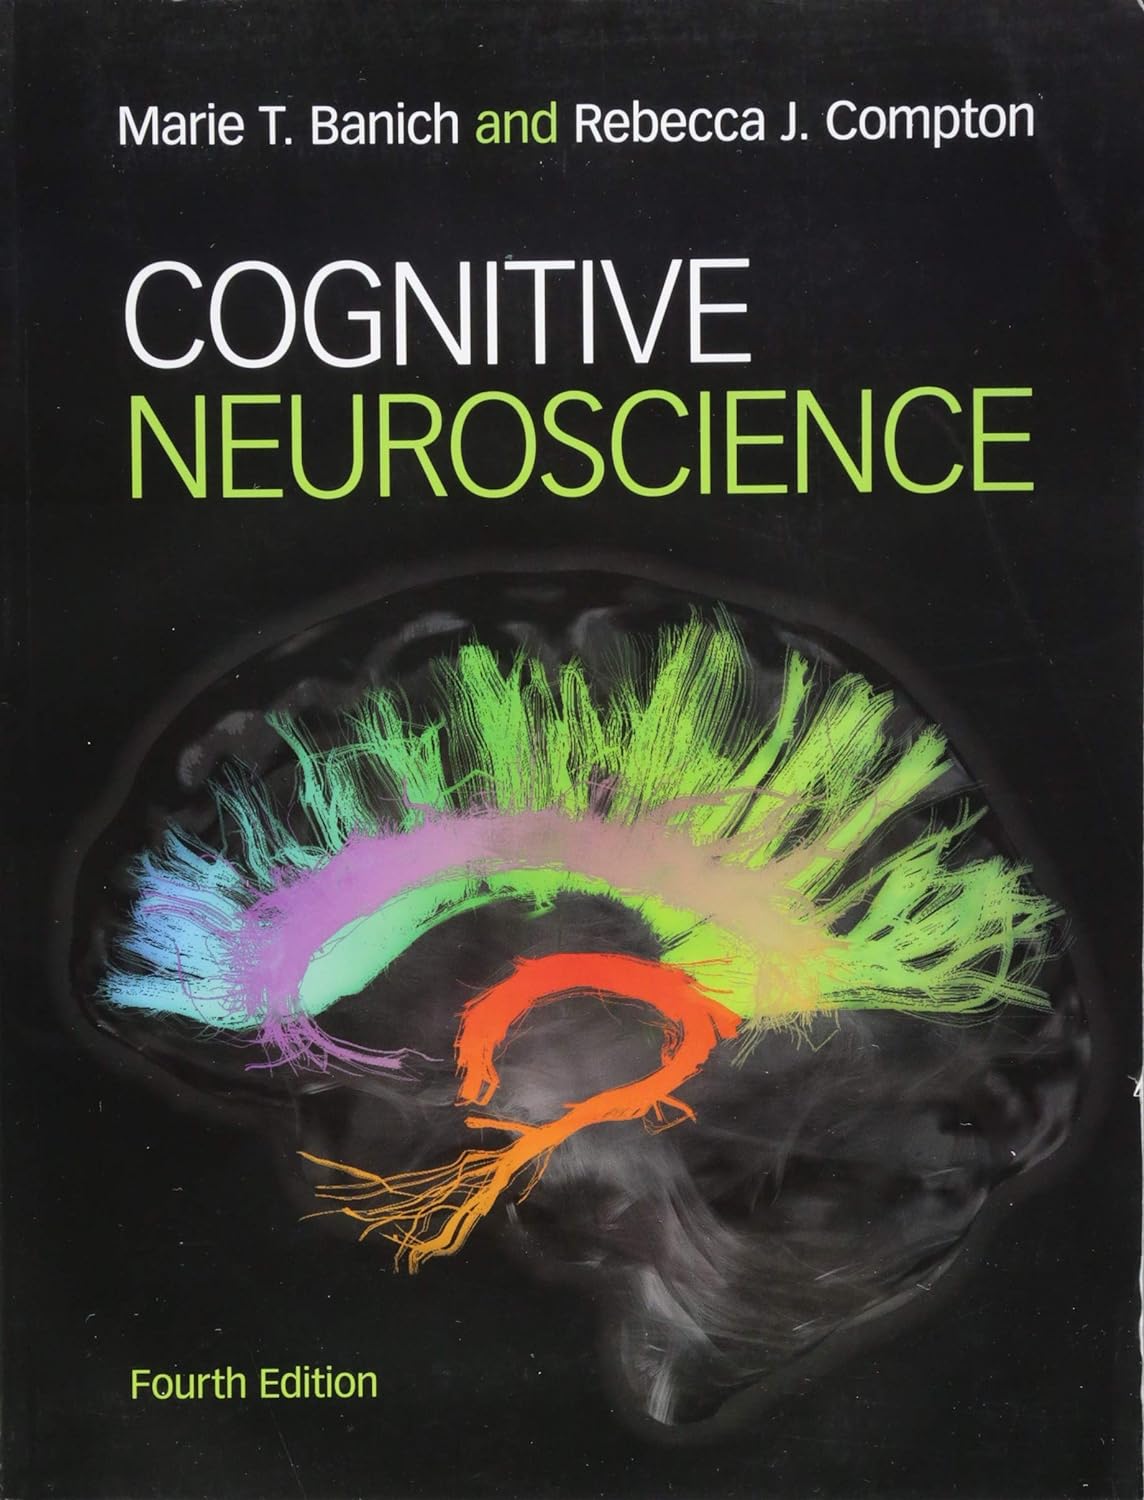 Test bank picture of the book Cognitive Neuroscience by Banich